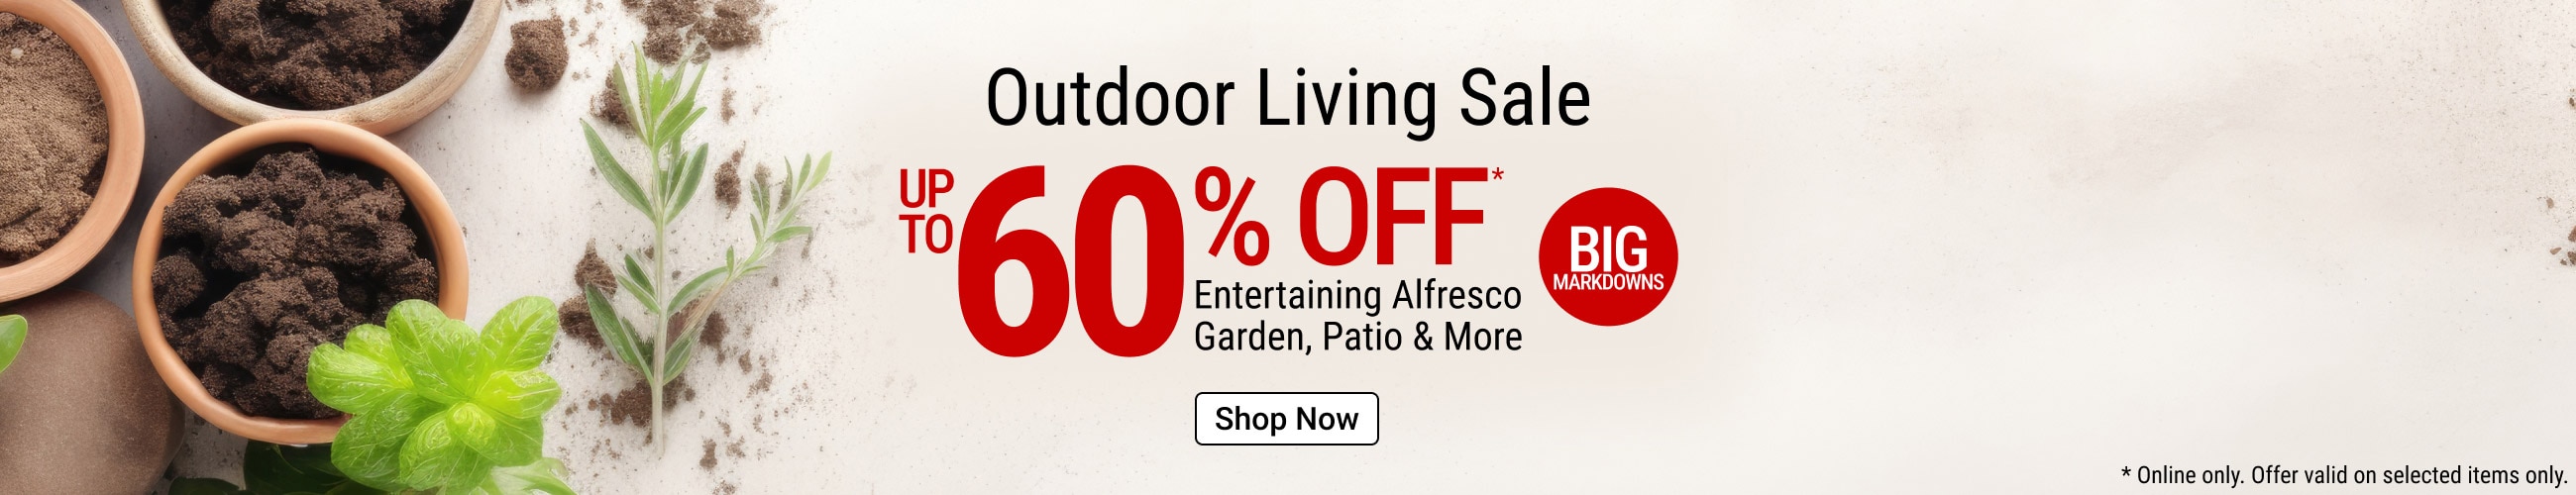 Outdoor living sale up to 60% off - shop now